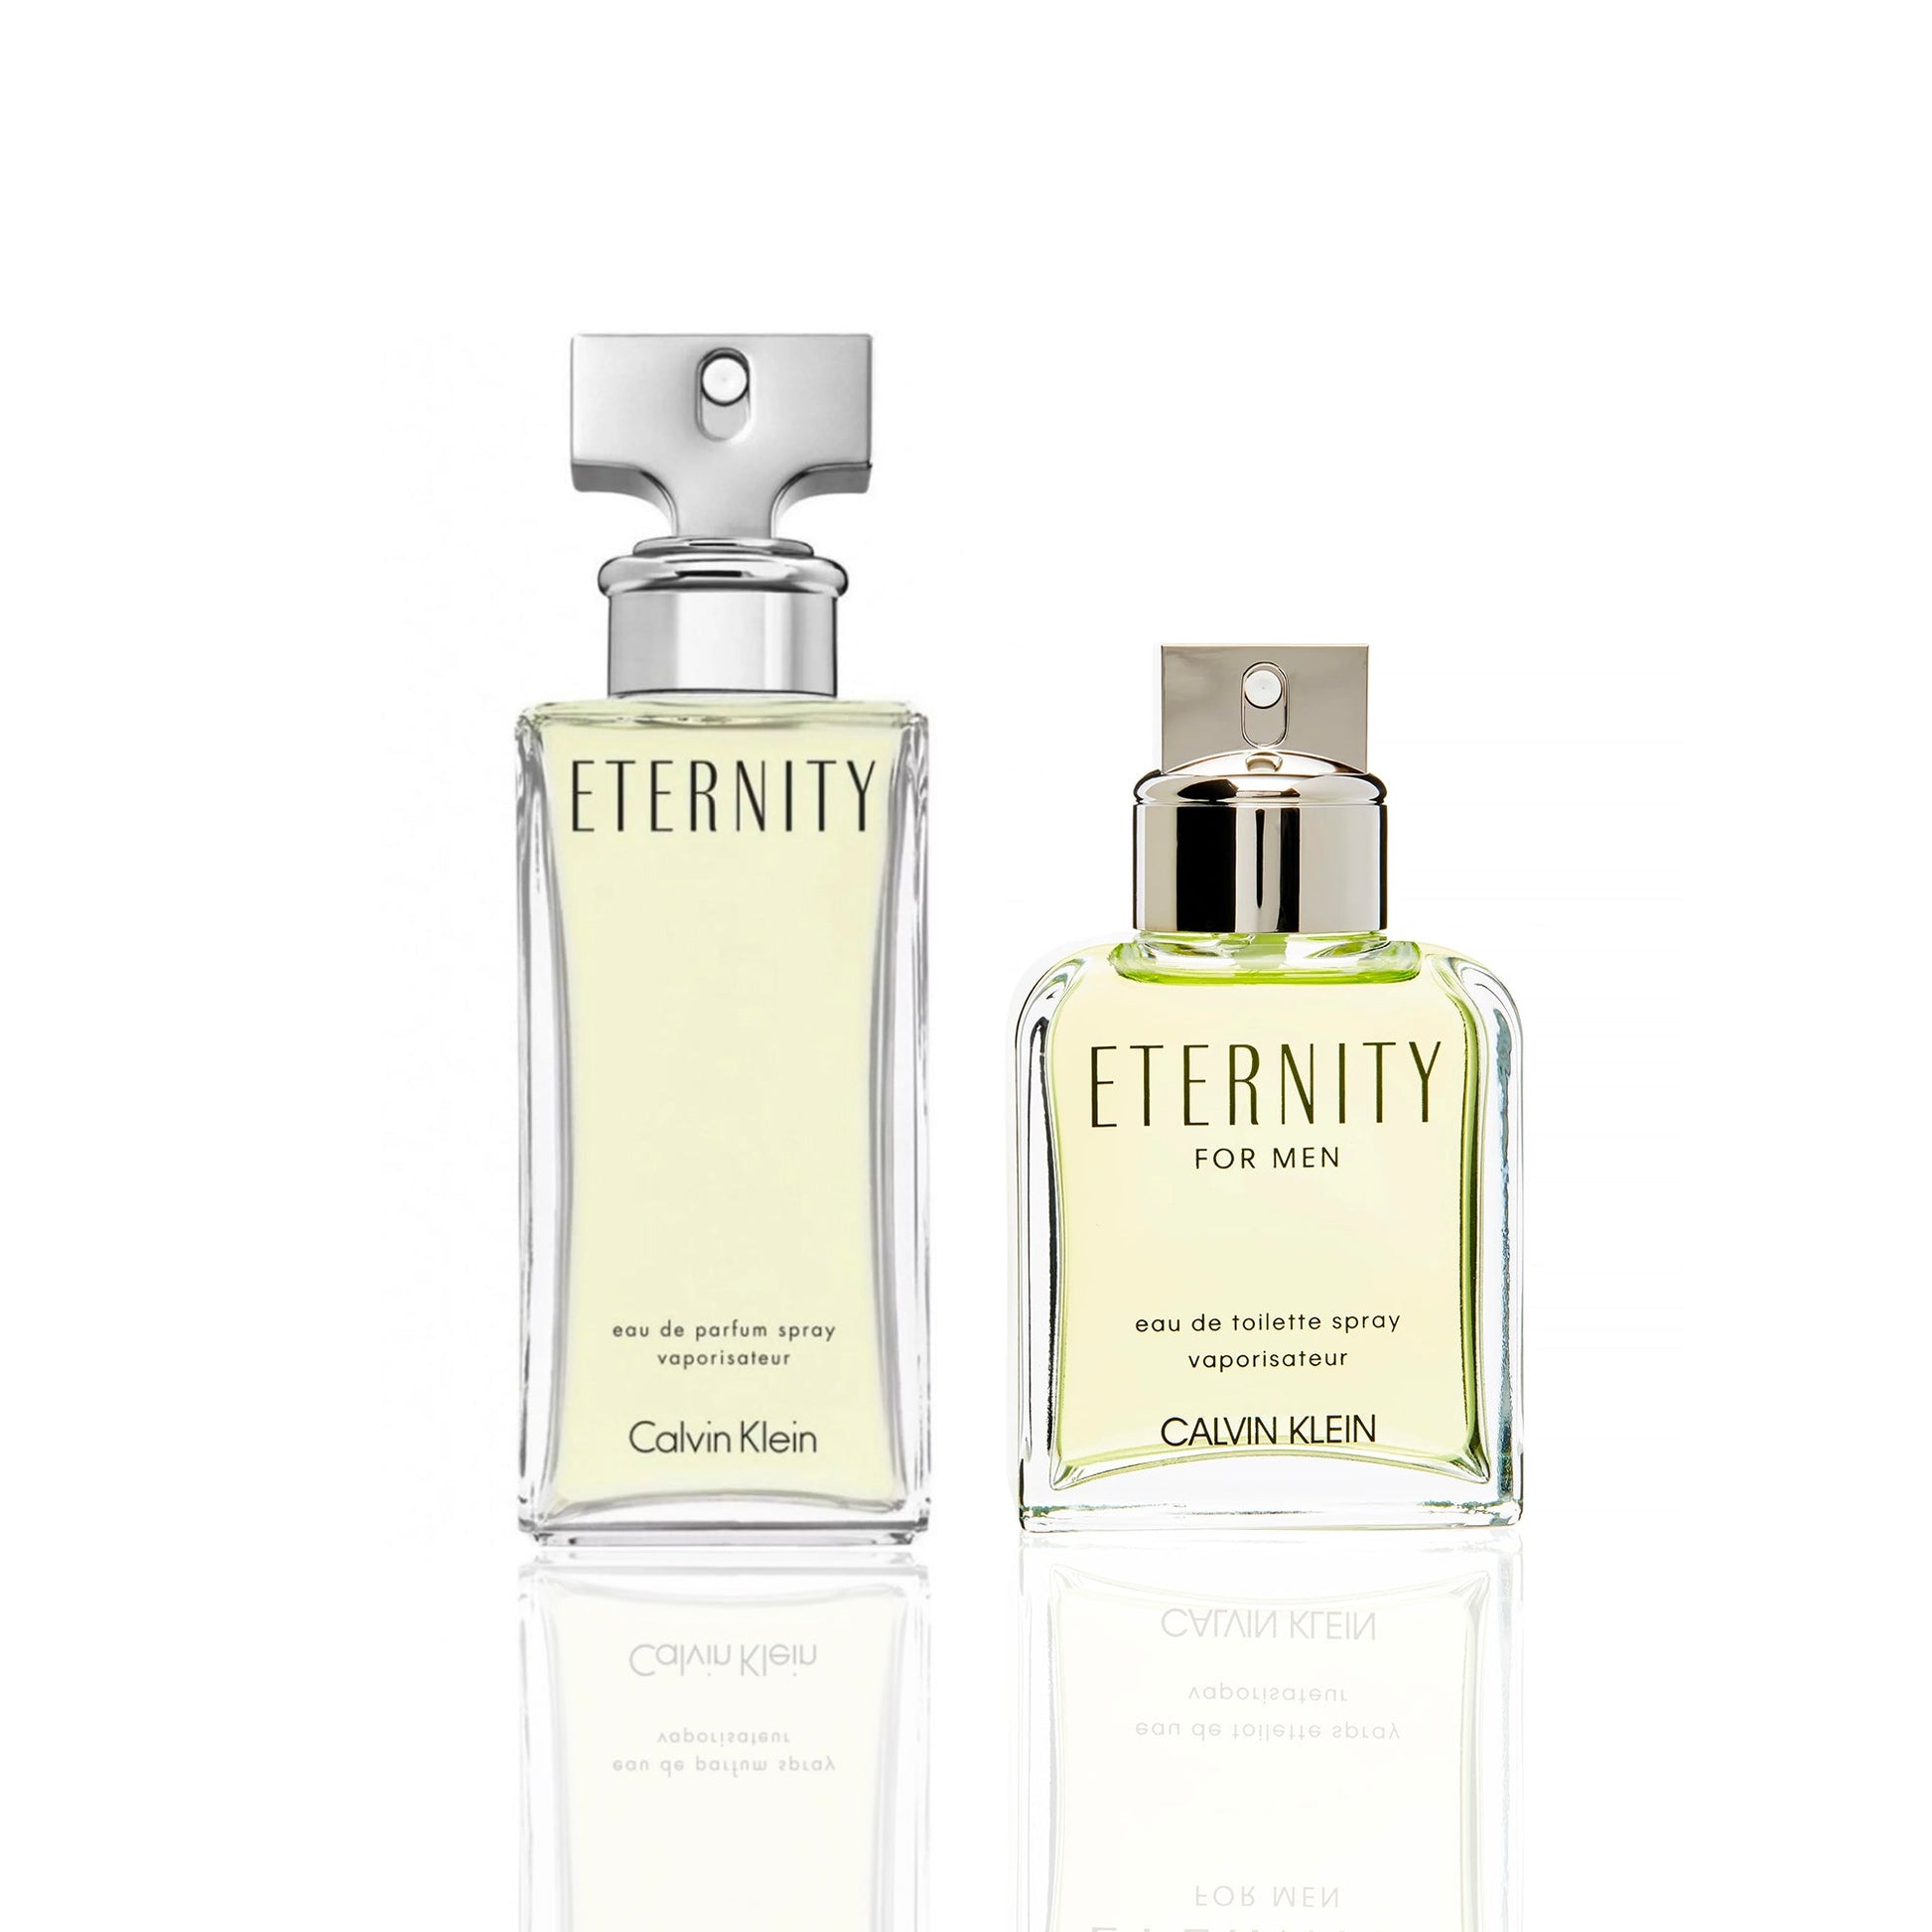 Bundle Deal His & Hers: Eternity by Calvin Klein for Men and Women, Product image 1